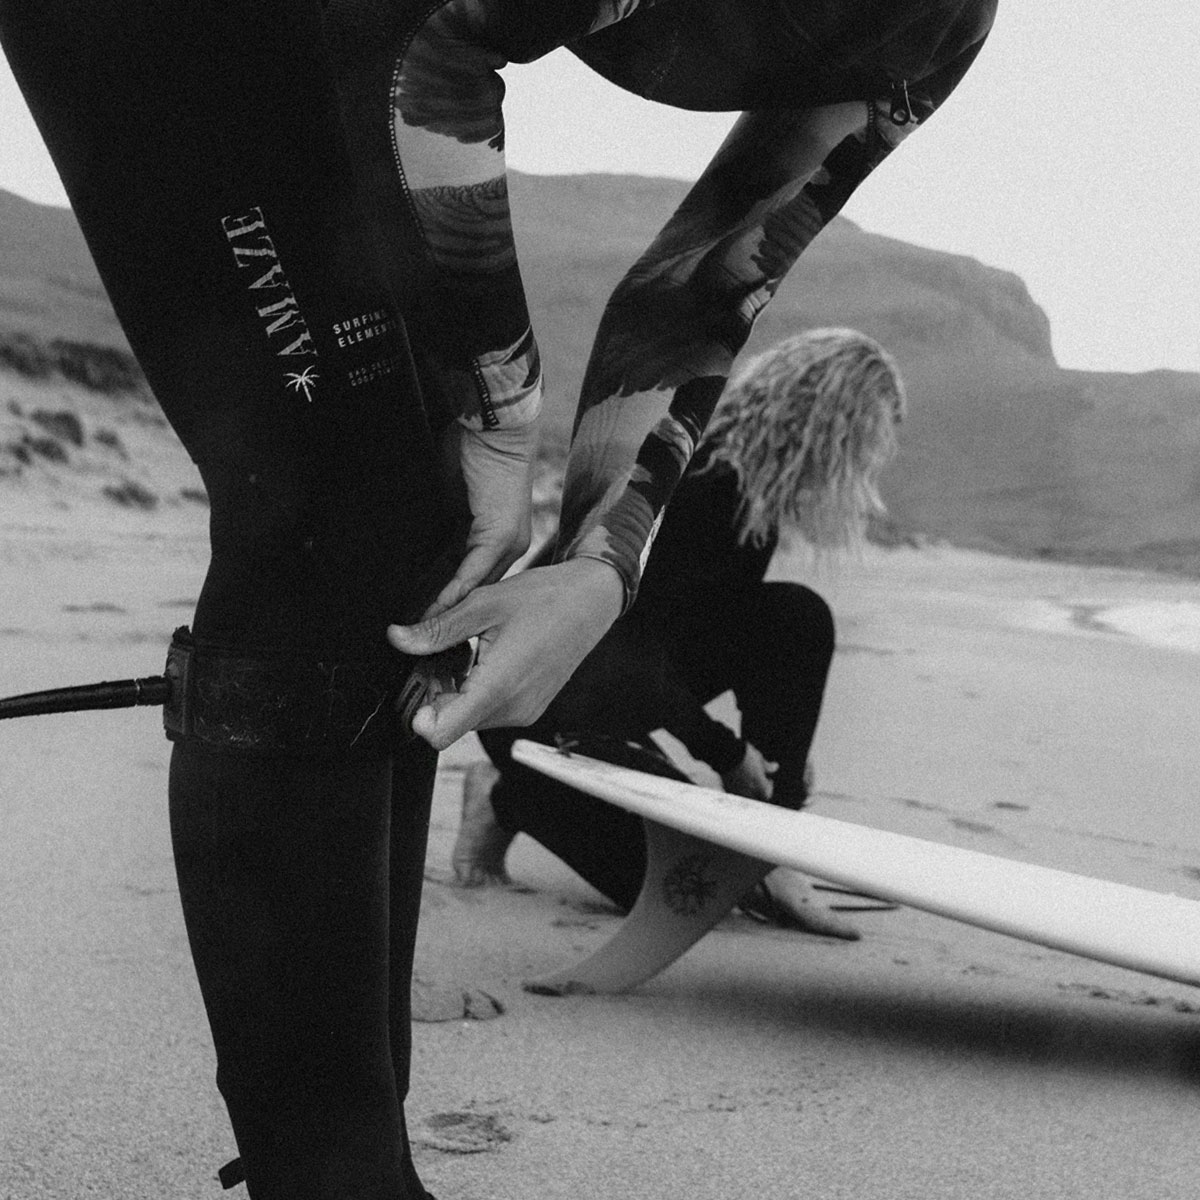 The Wetsuit Guide: How to choose the right wetsuit according to